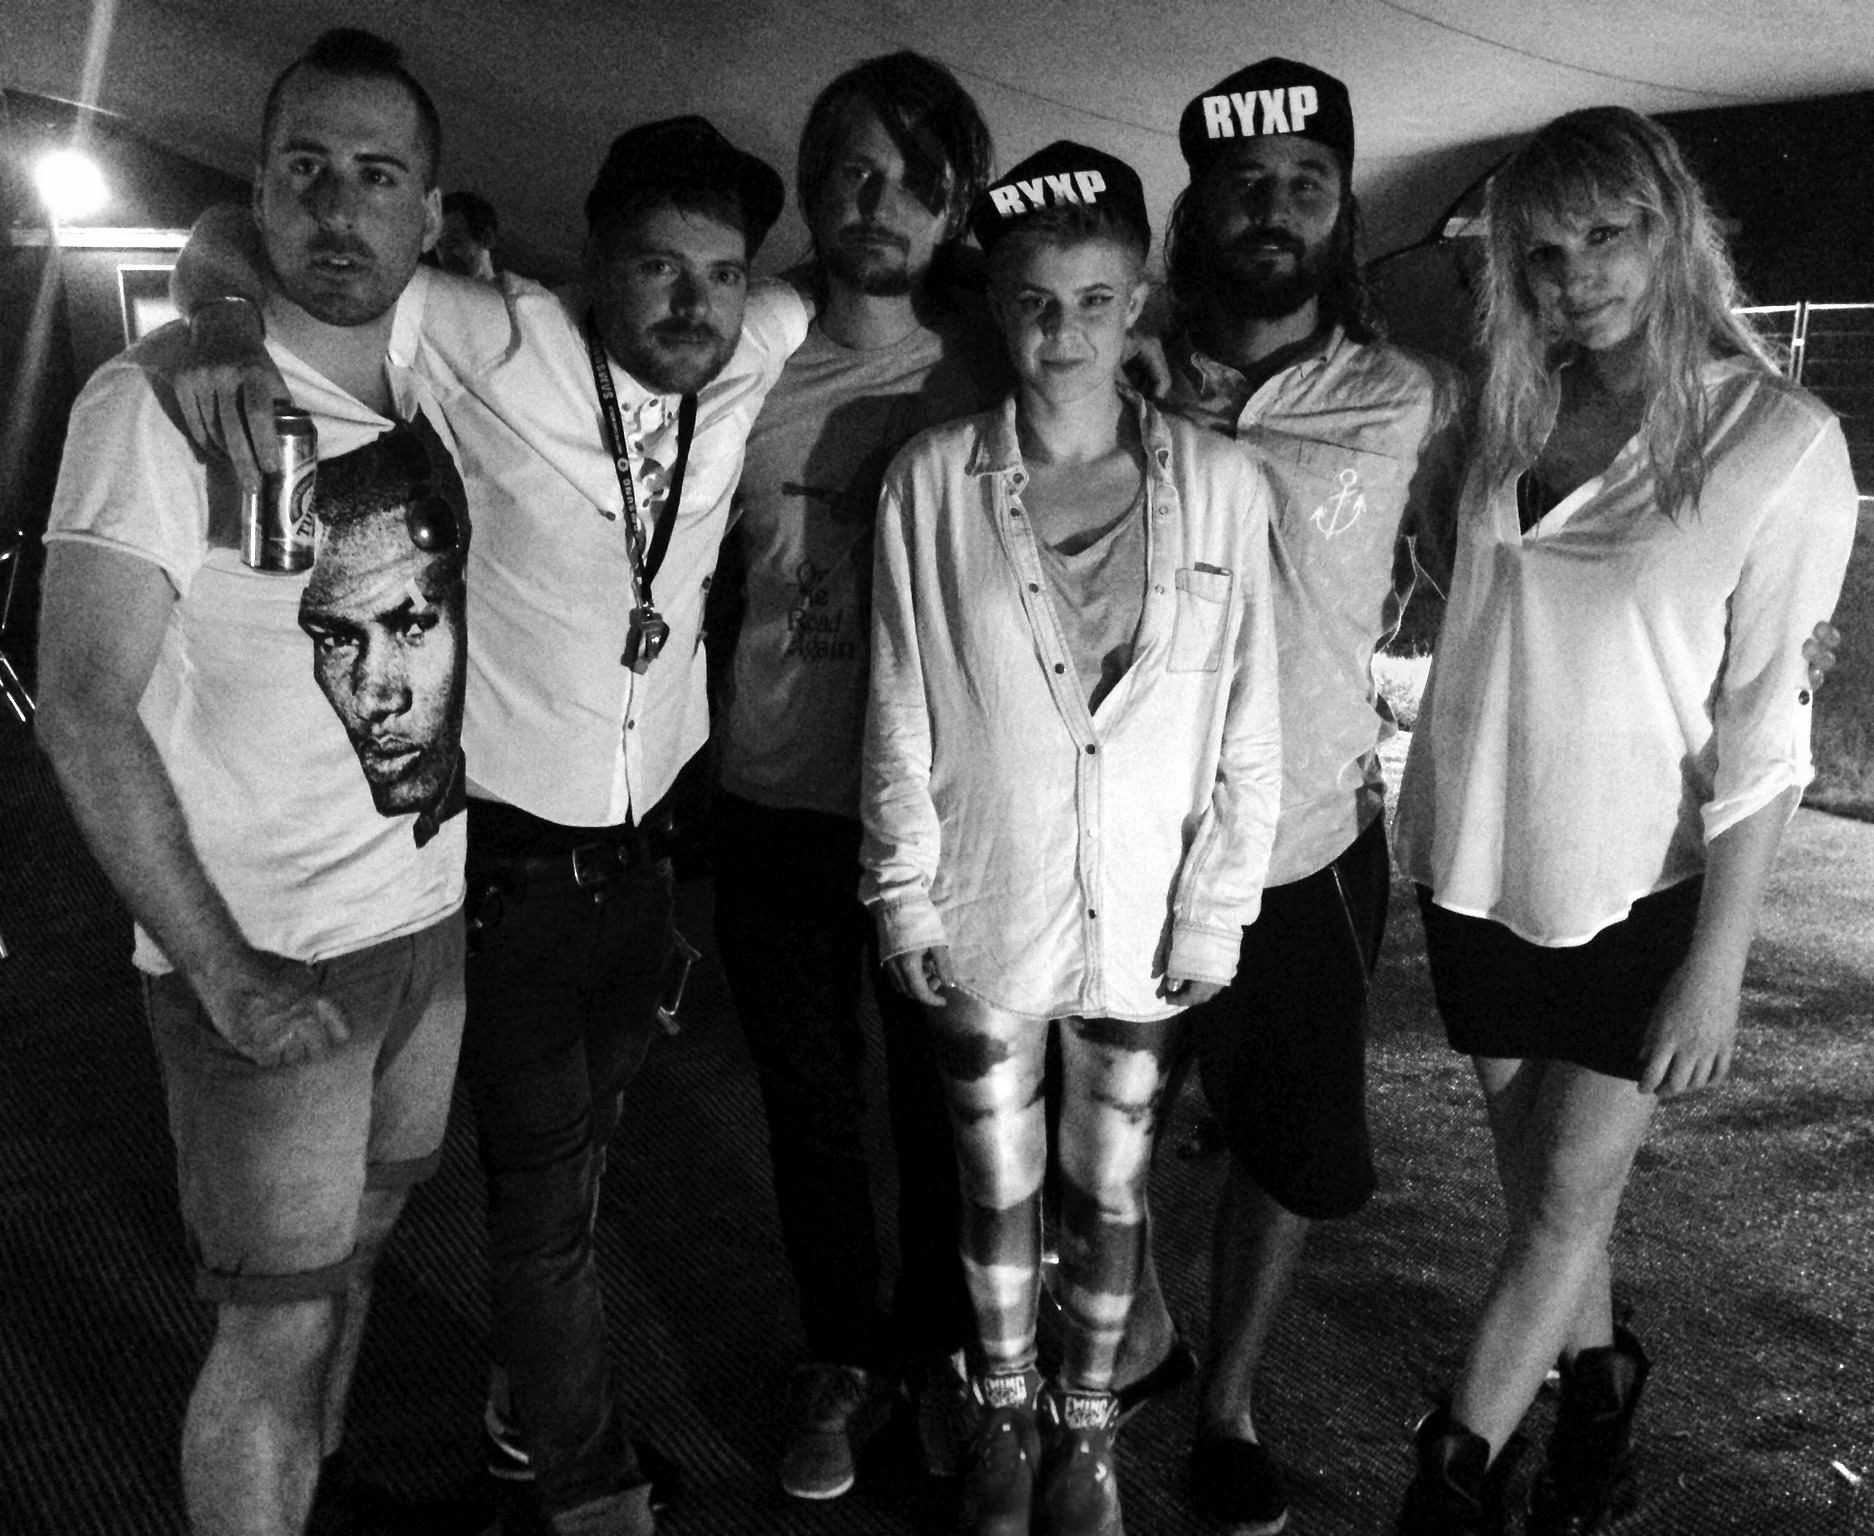 The artists of 'The Inevitable End', from Röyksopp's Facebook page.